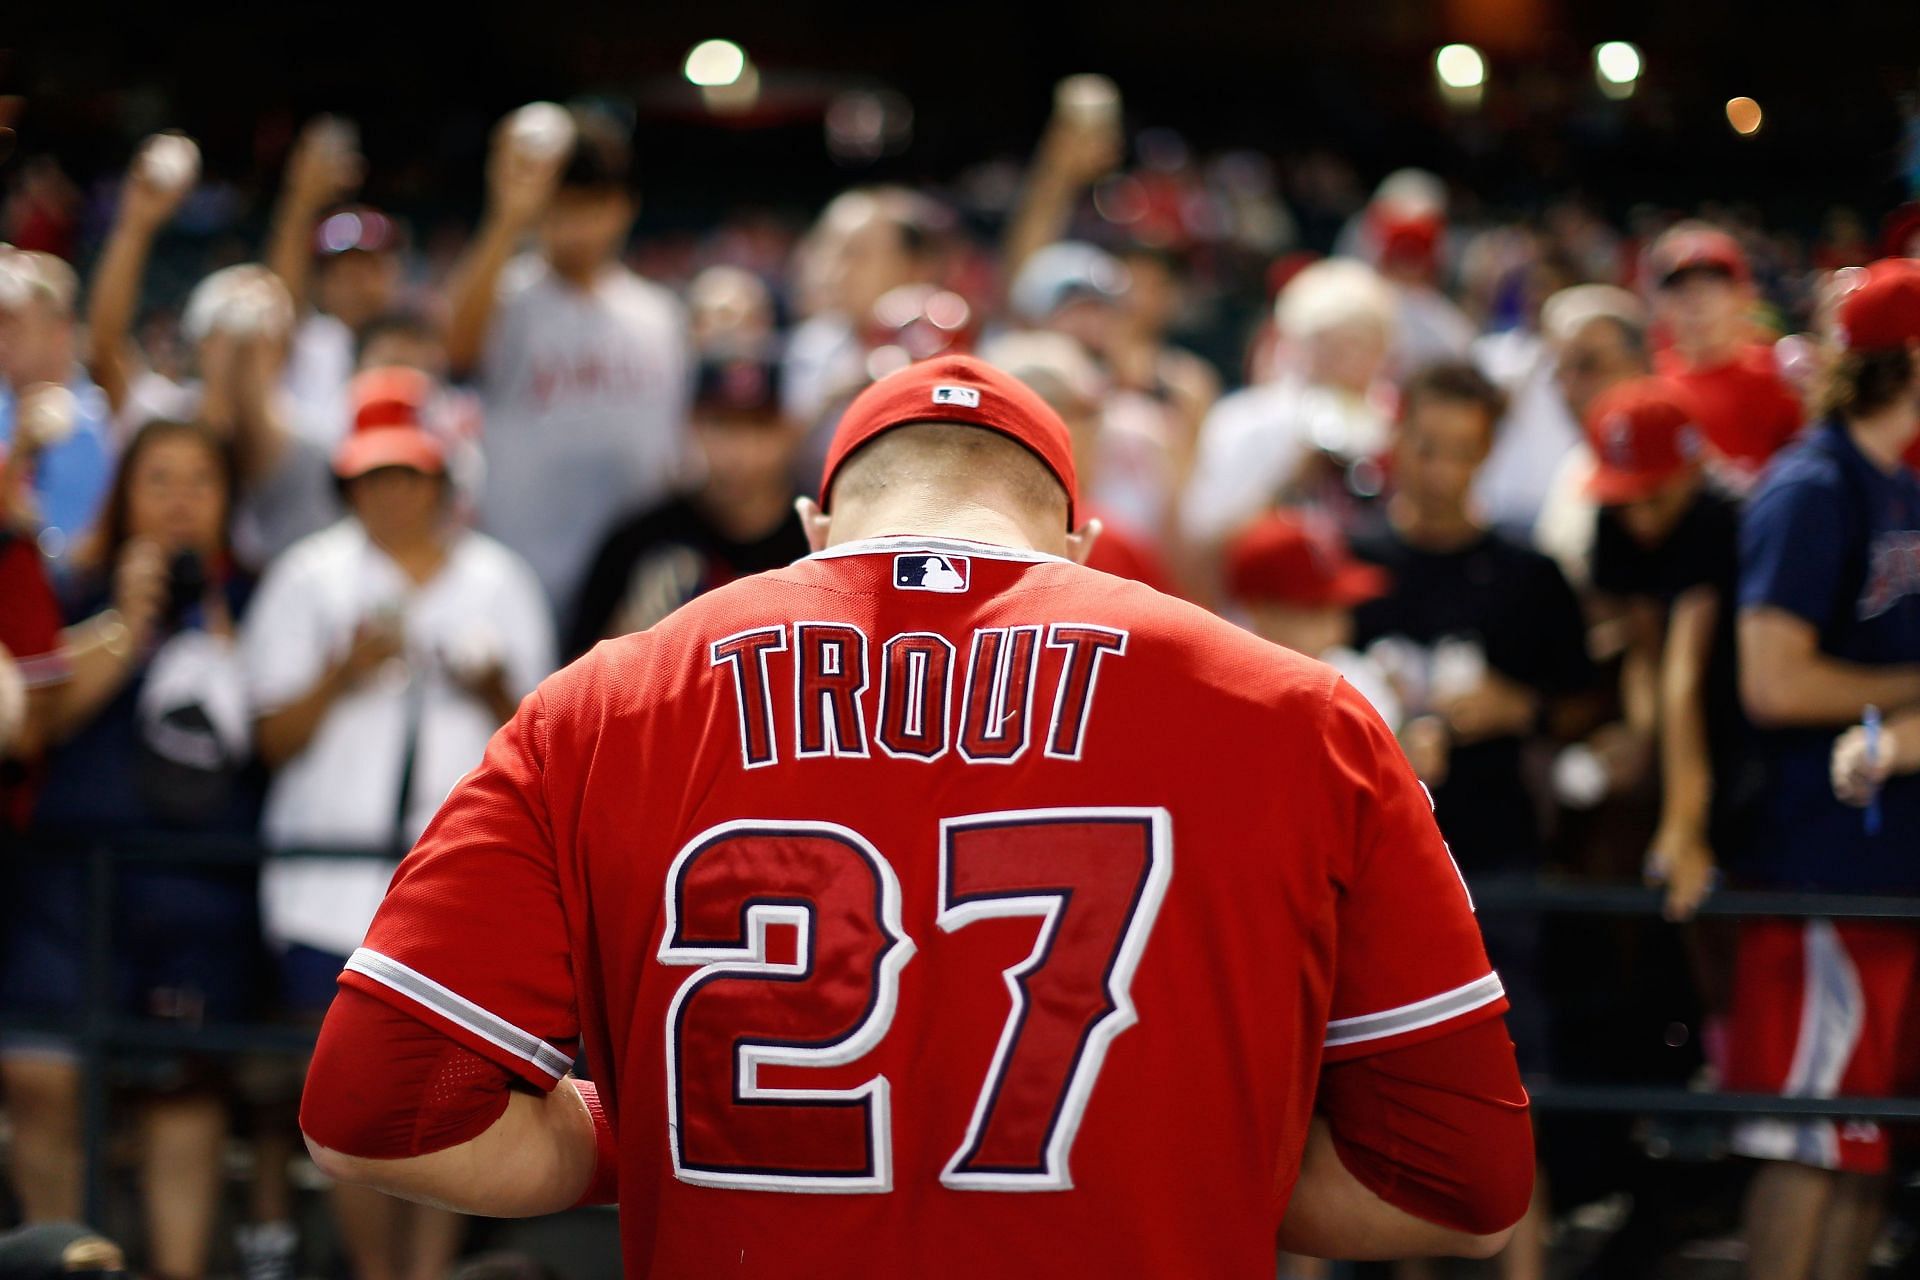 Ron Washington has expressed his desire for Mike Trout to attempt more base-running and stealing in the upcoming season.